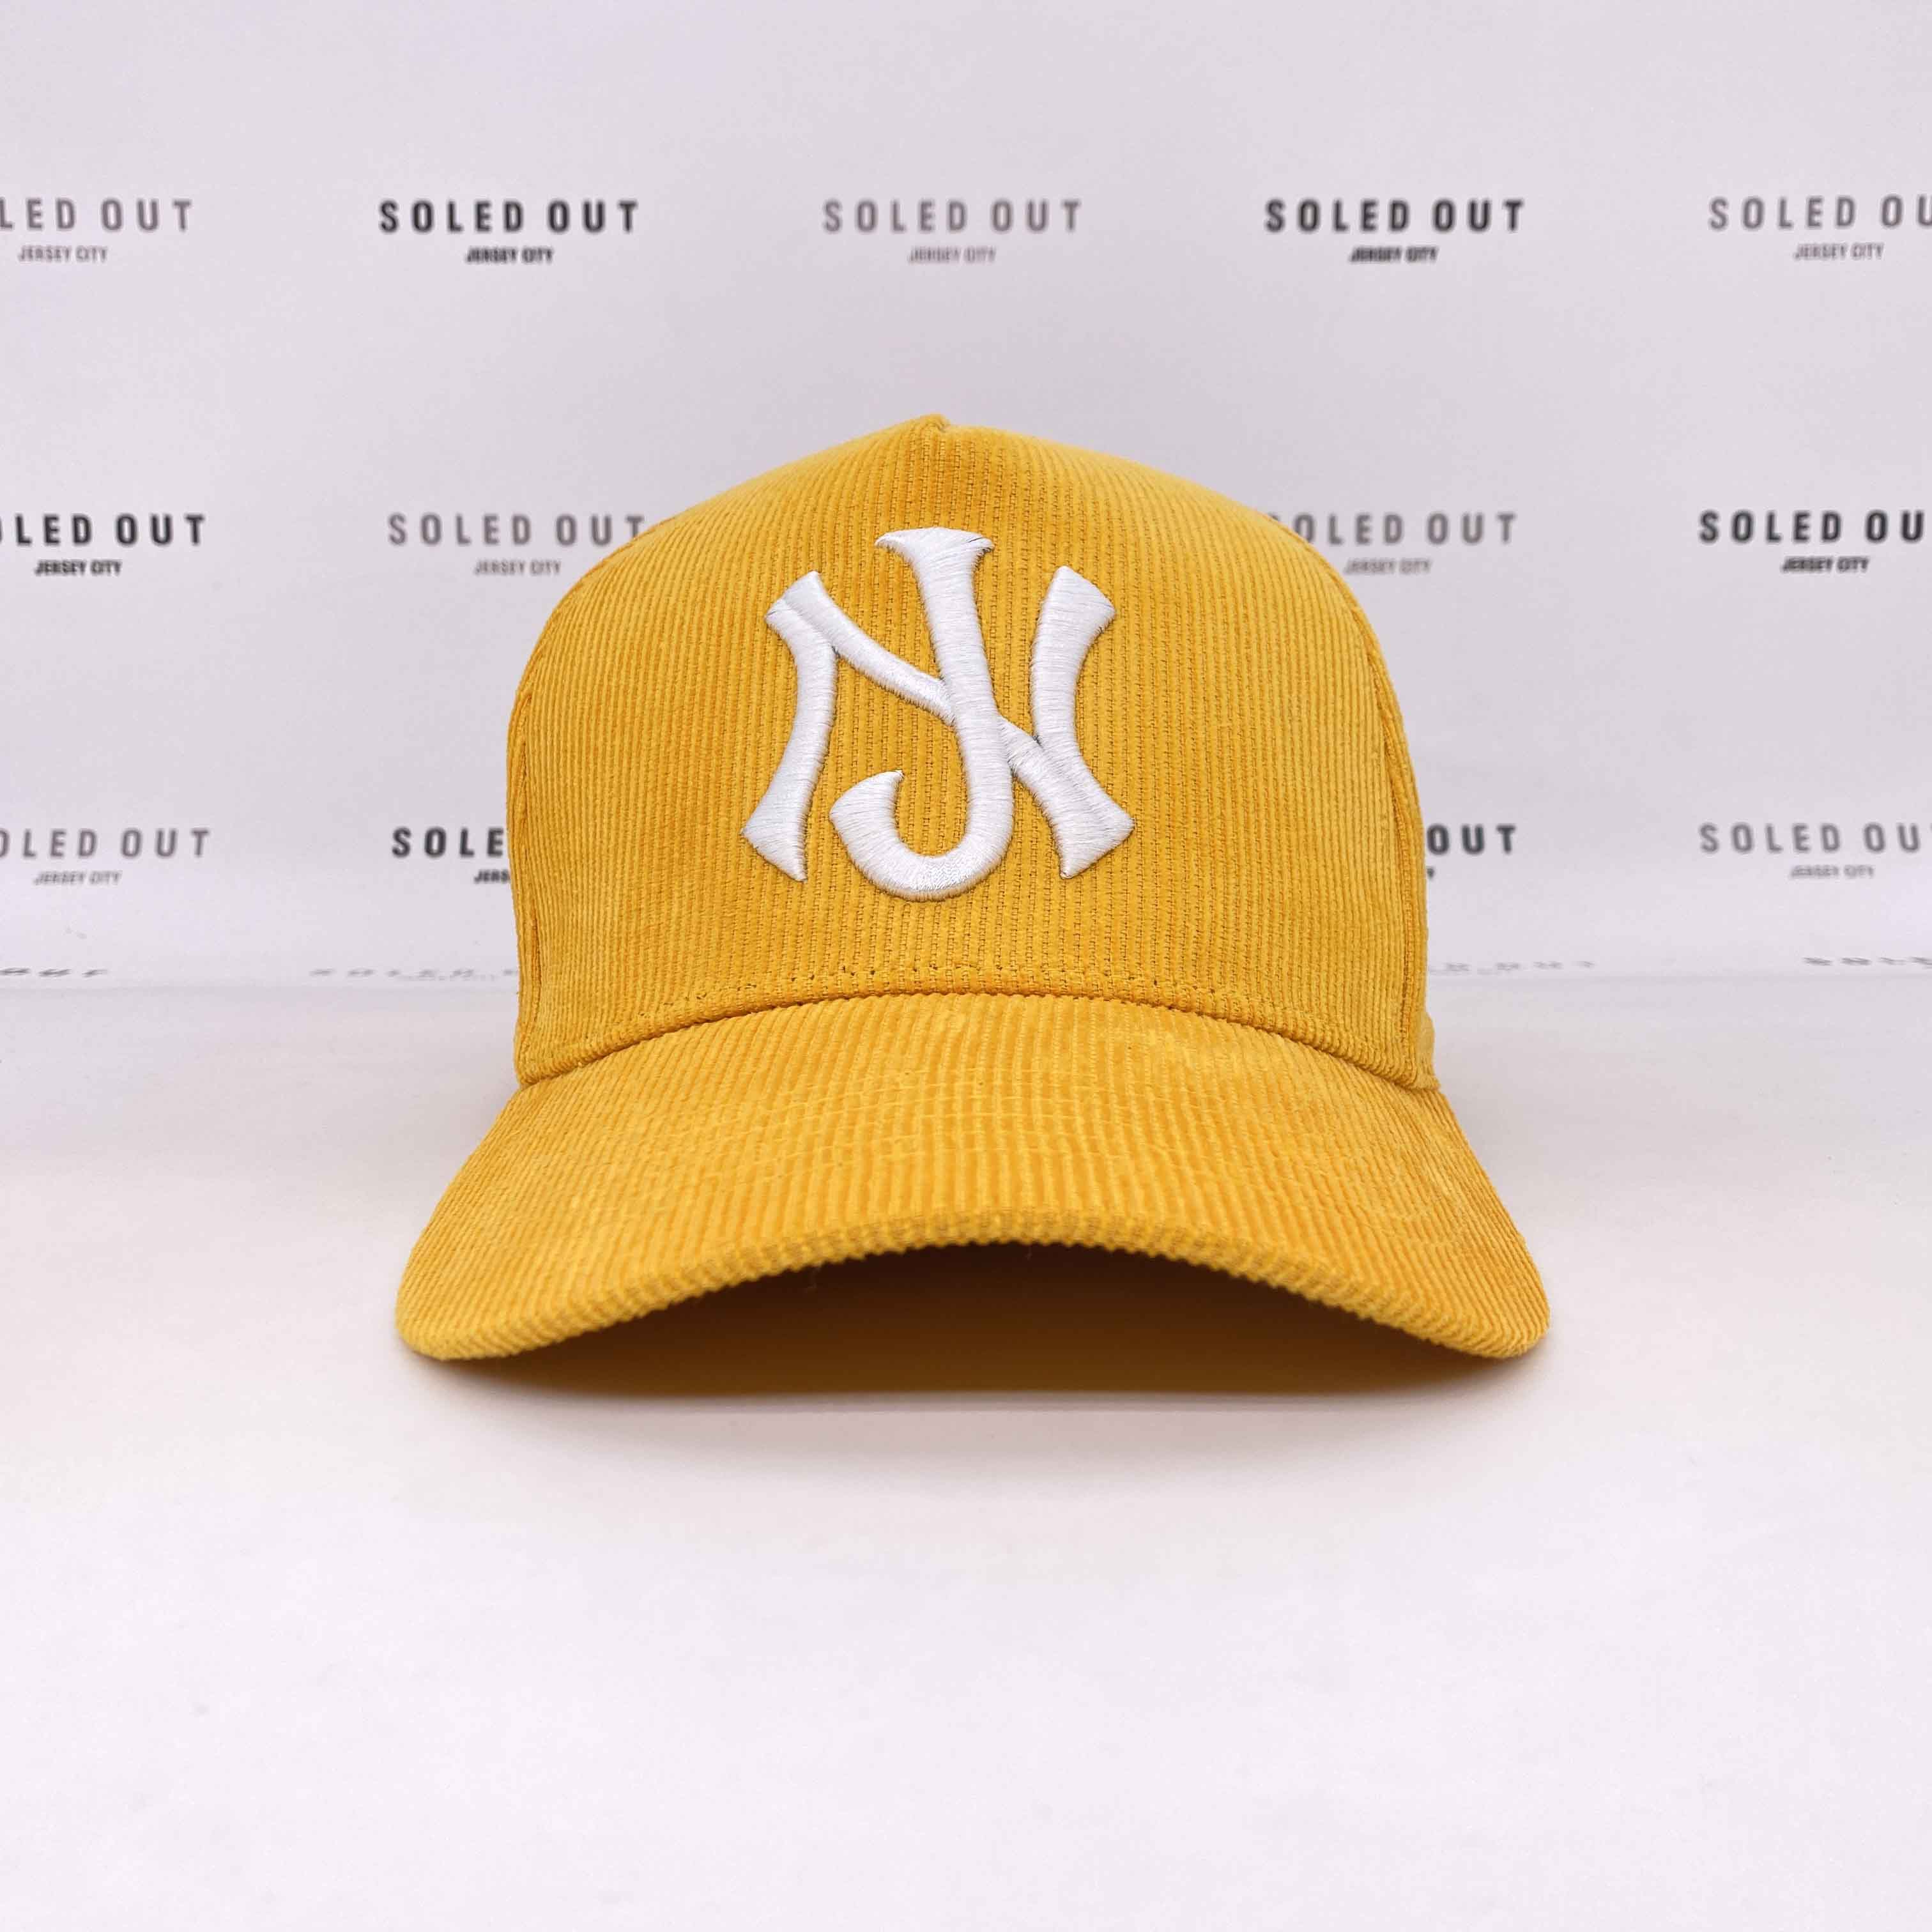 Soled Out Snapback "CORDUROY MUSTARD" 2022 New Size OS